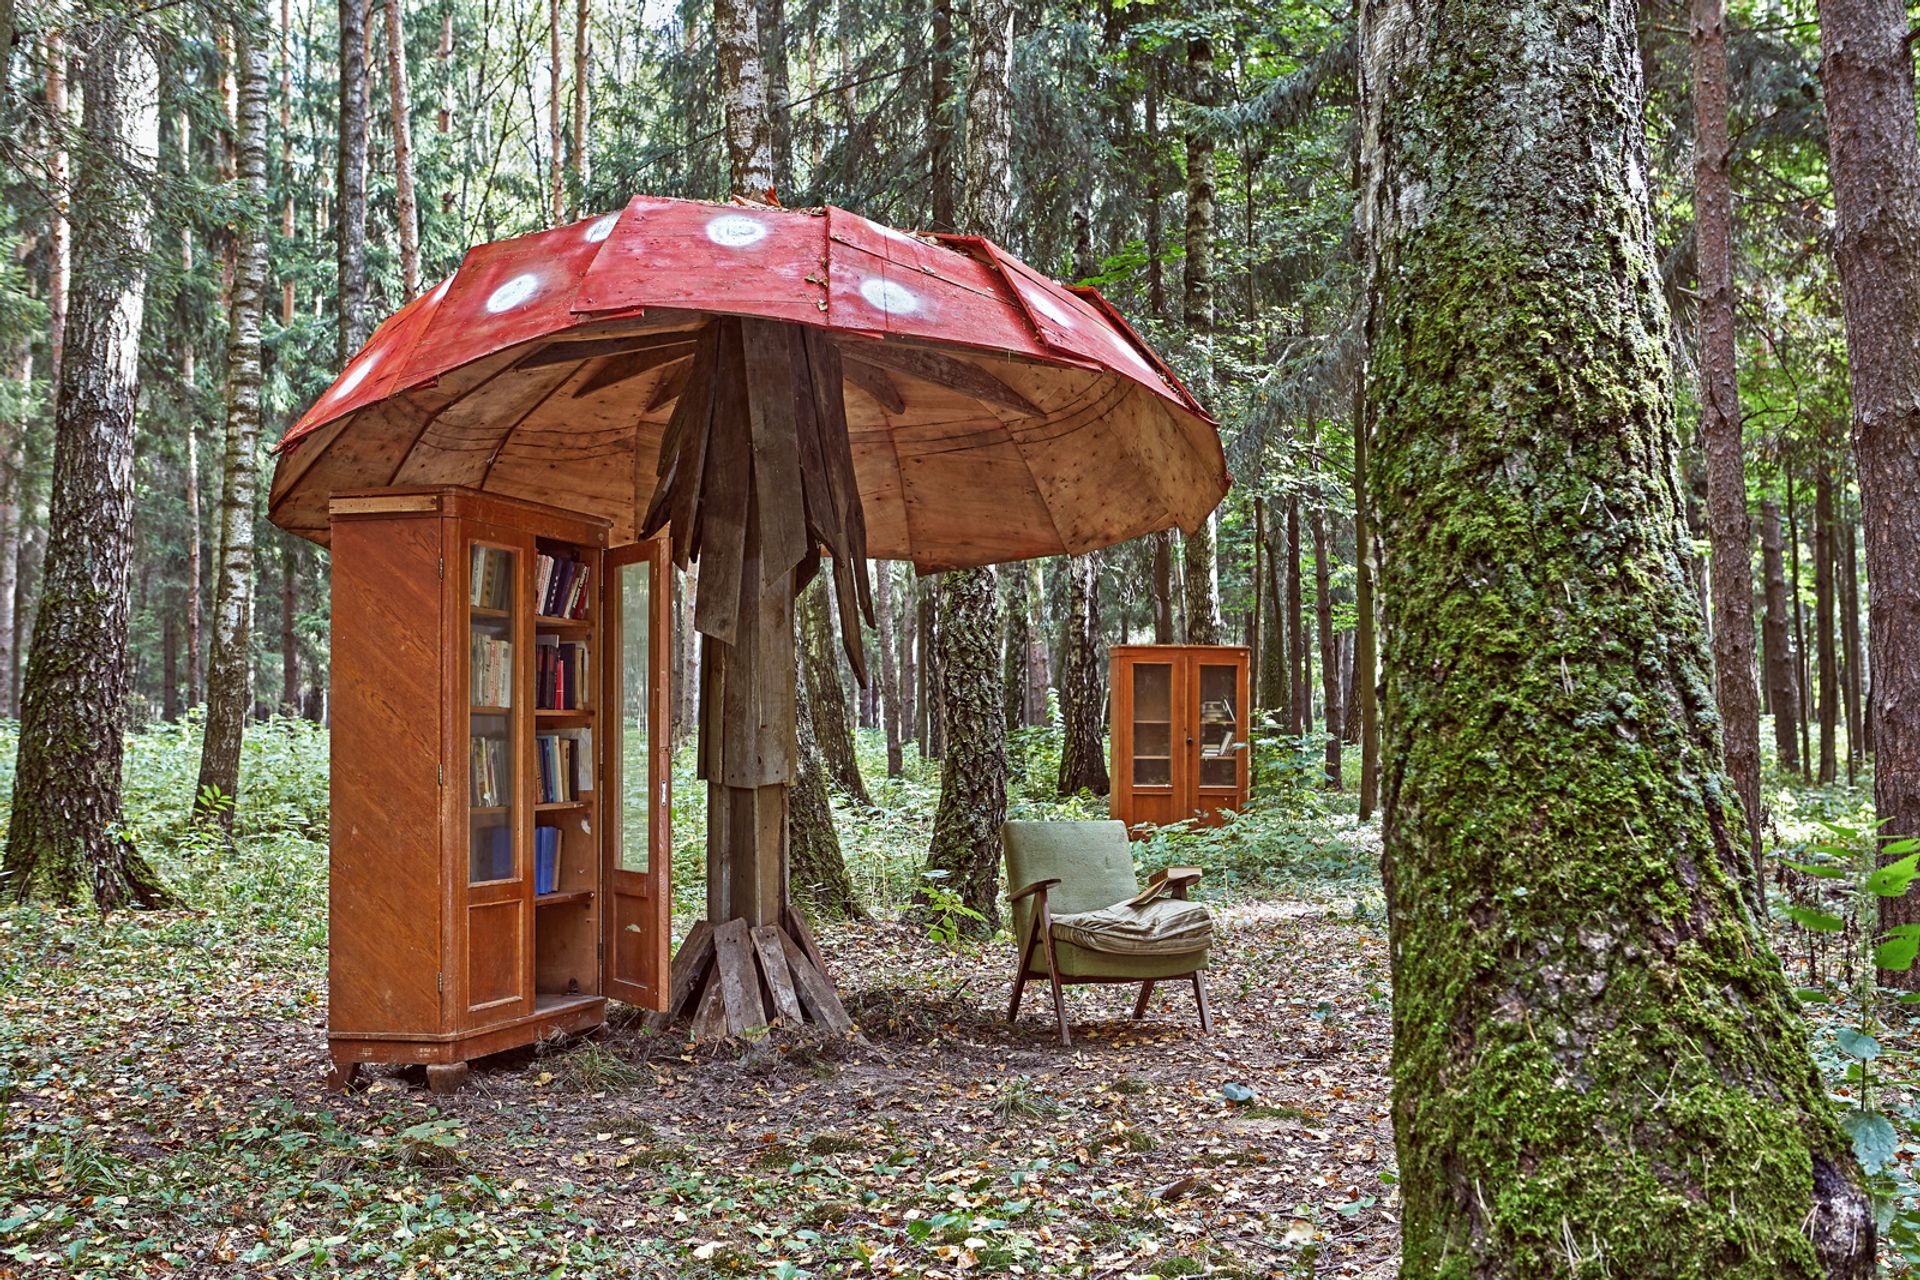 Pavel Pepperstein's Furniture in the Forest ©Jart Gallery